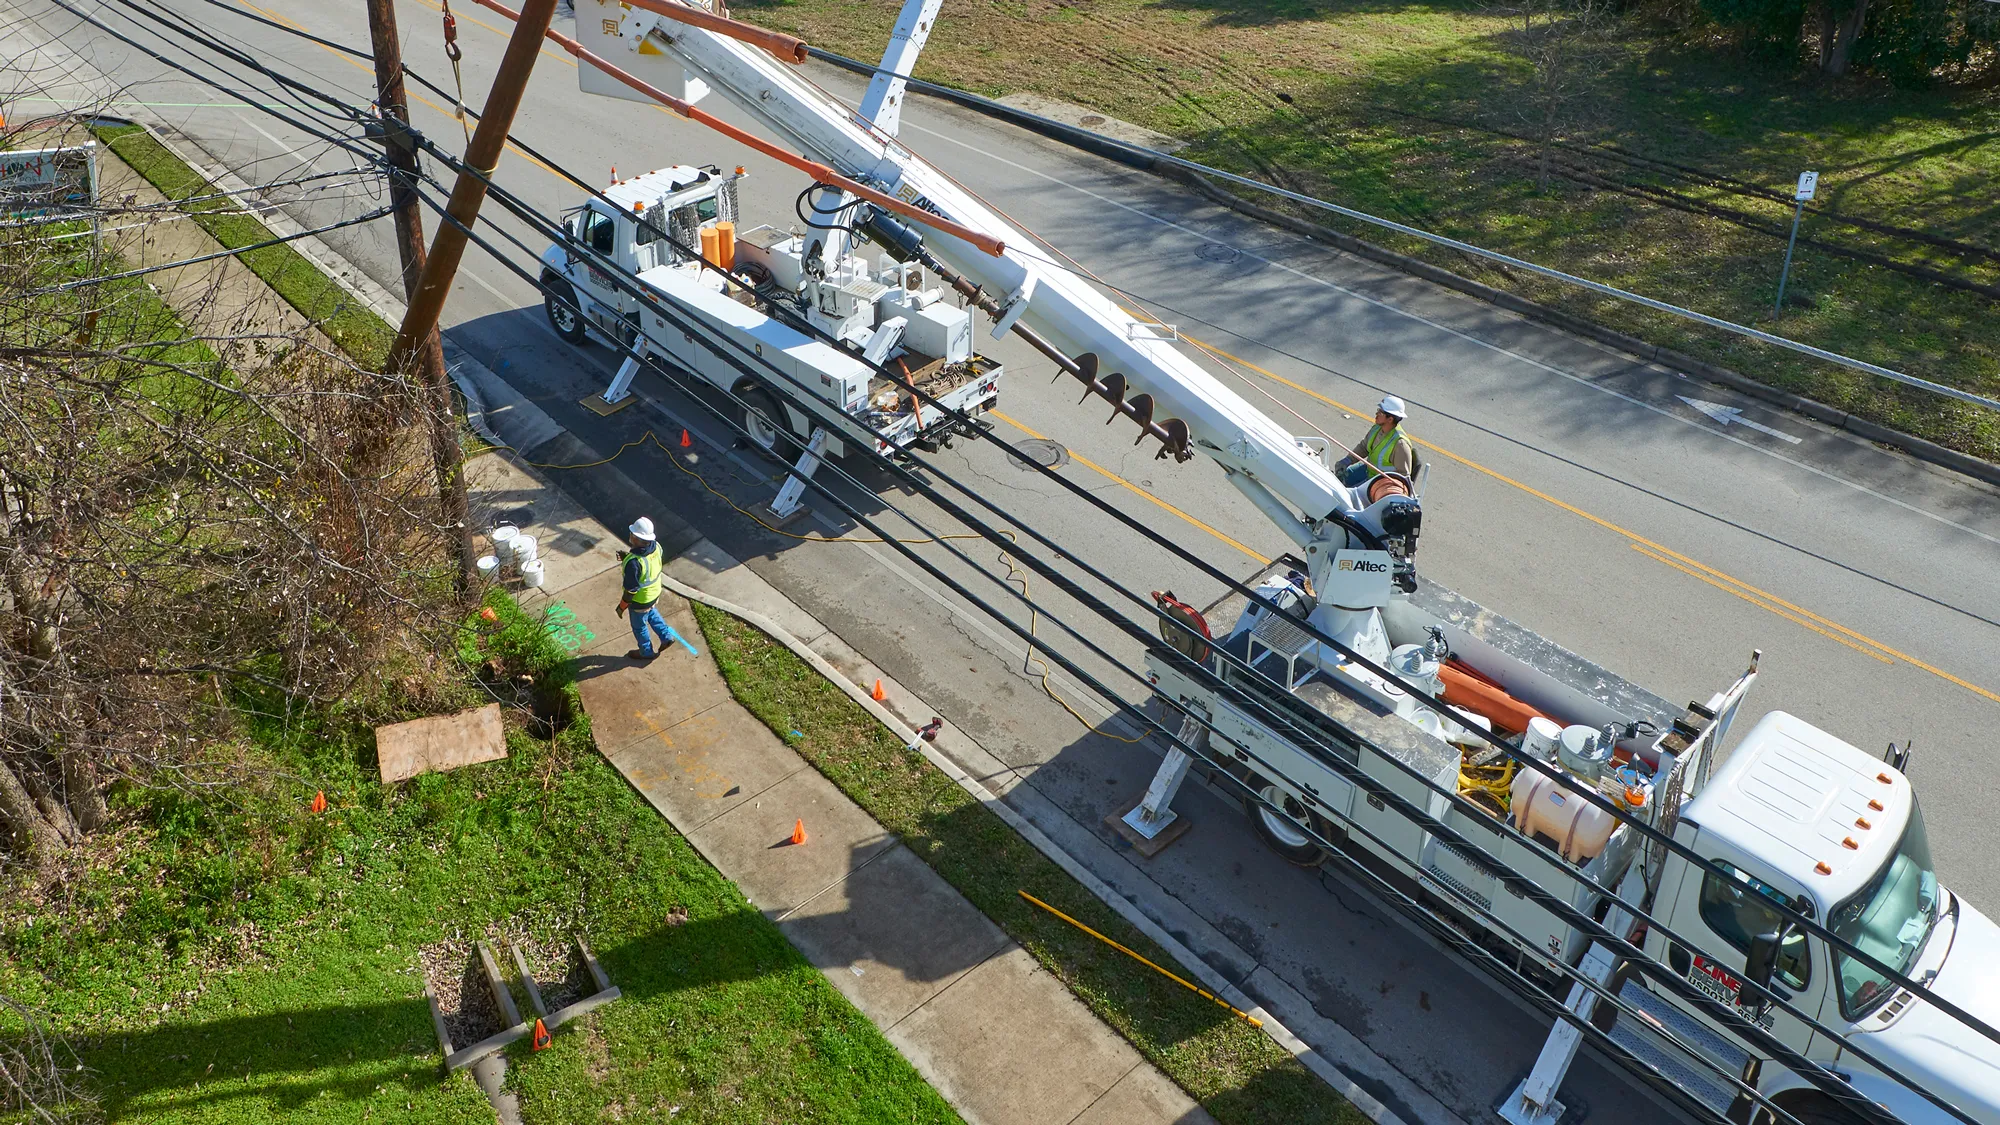 Linetec workers in hard hats and safety goggles work on downed power lines in San Marcos Texas.